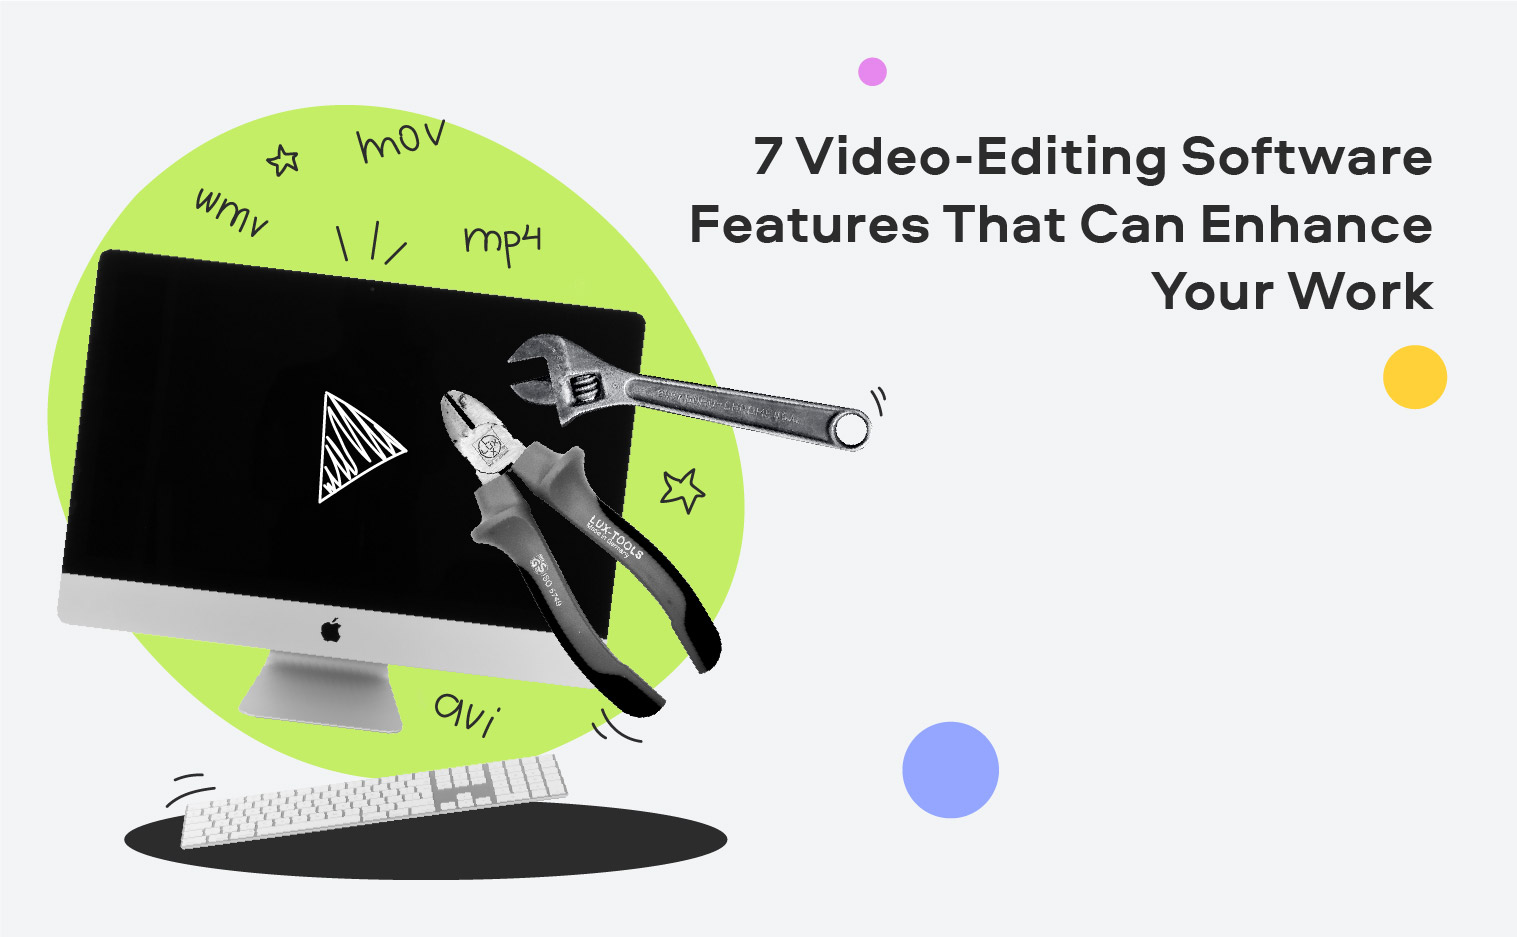 7 Video-Editing Software Features That Can Enhance Your Work